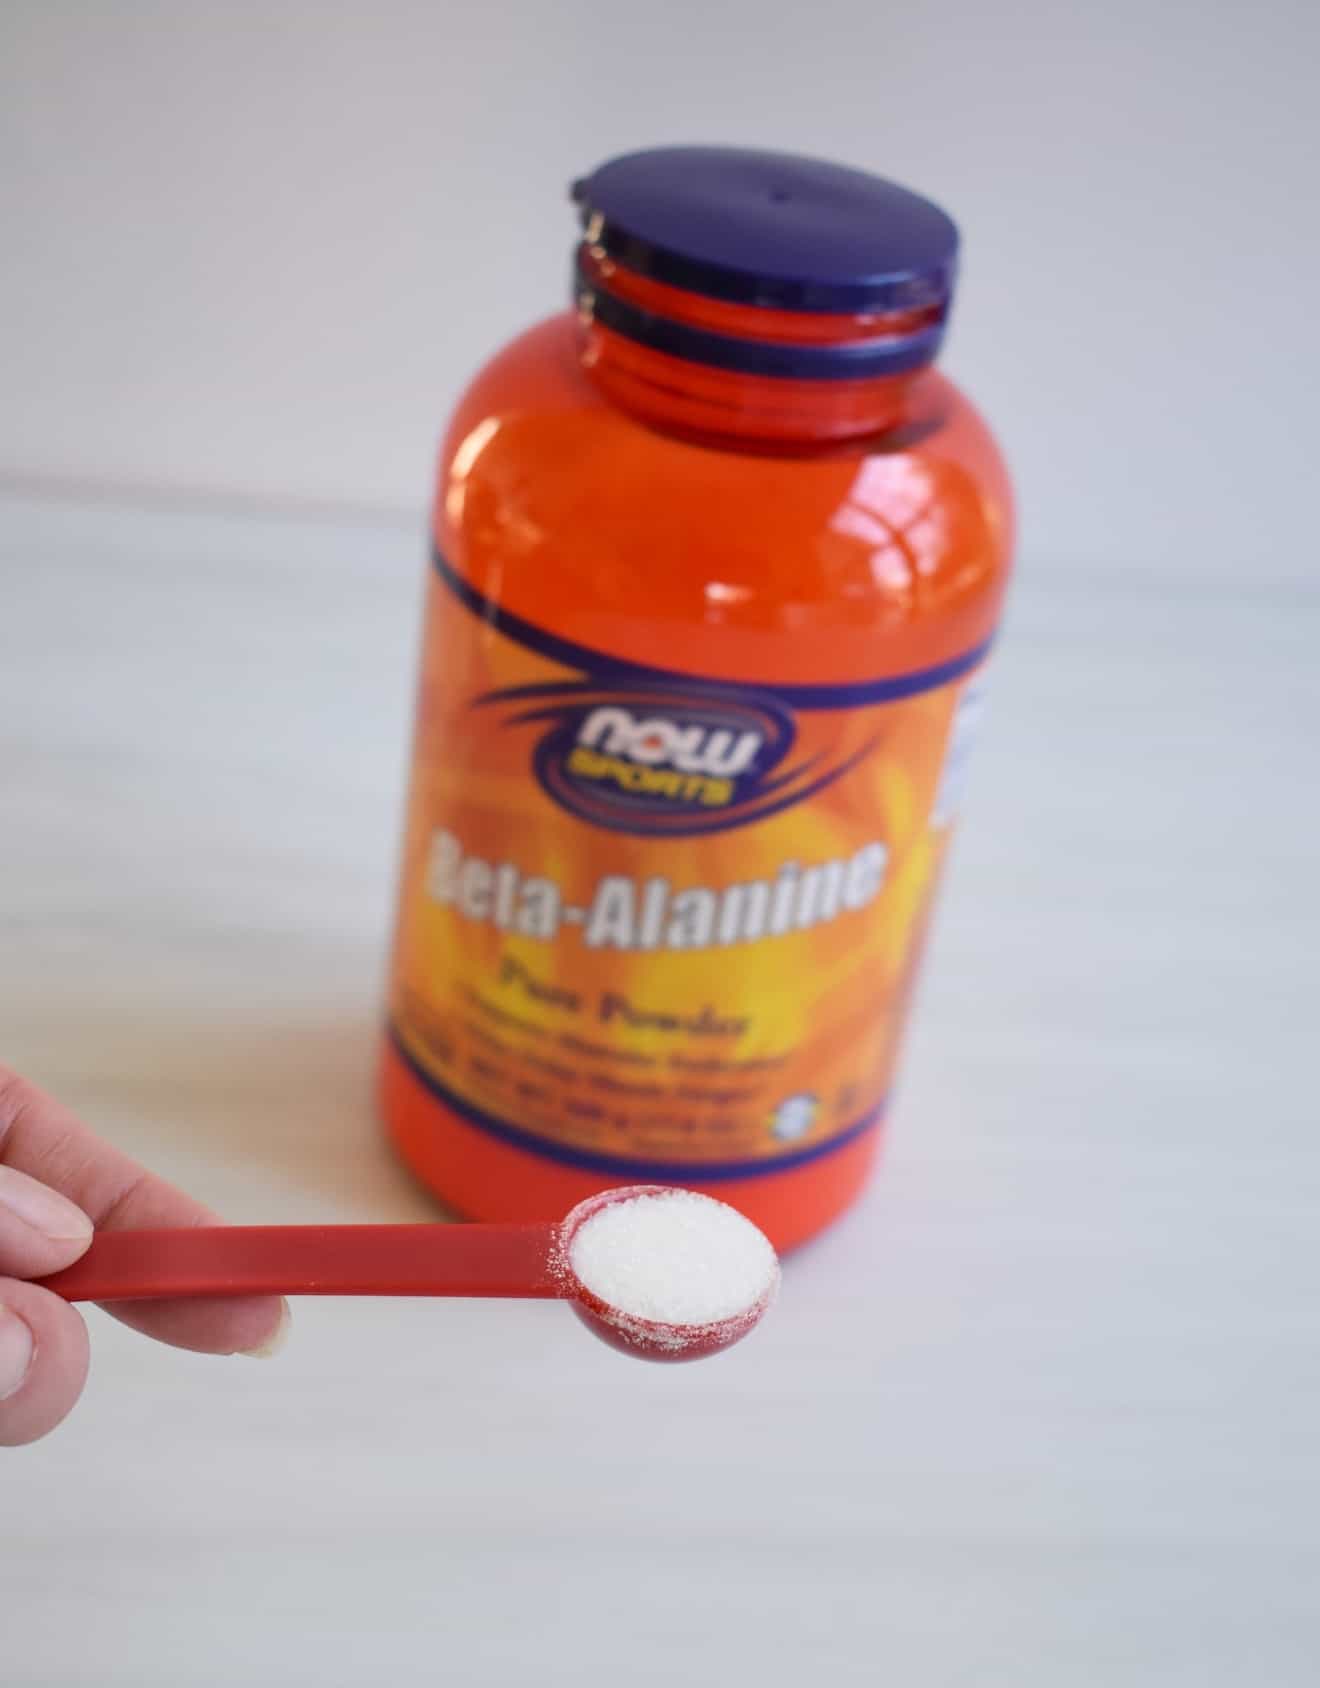 A triathlete measuring out a scoop of beta alanine powder